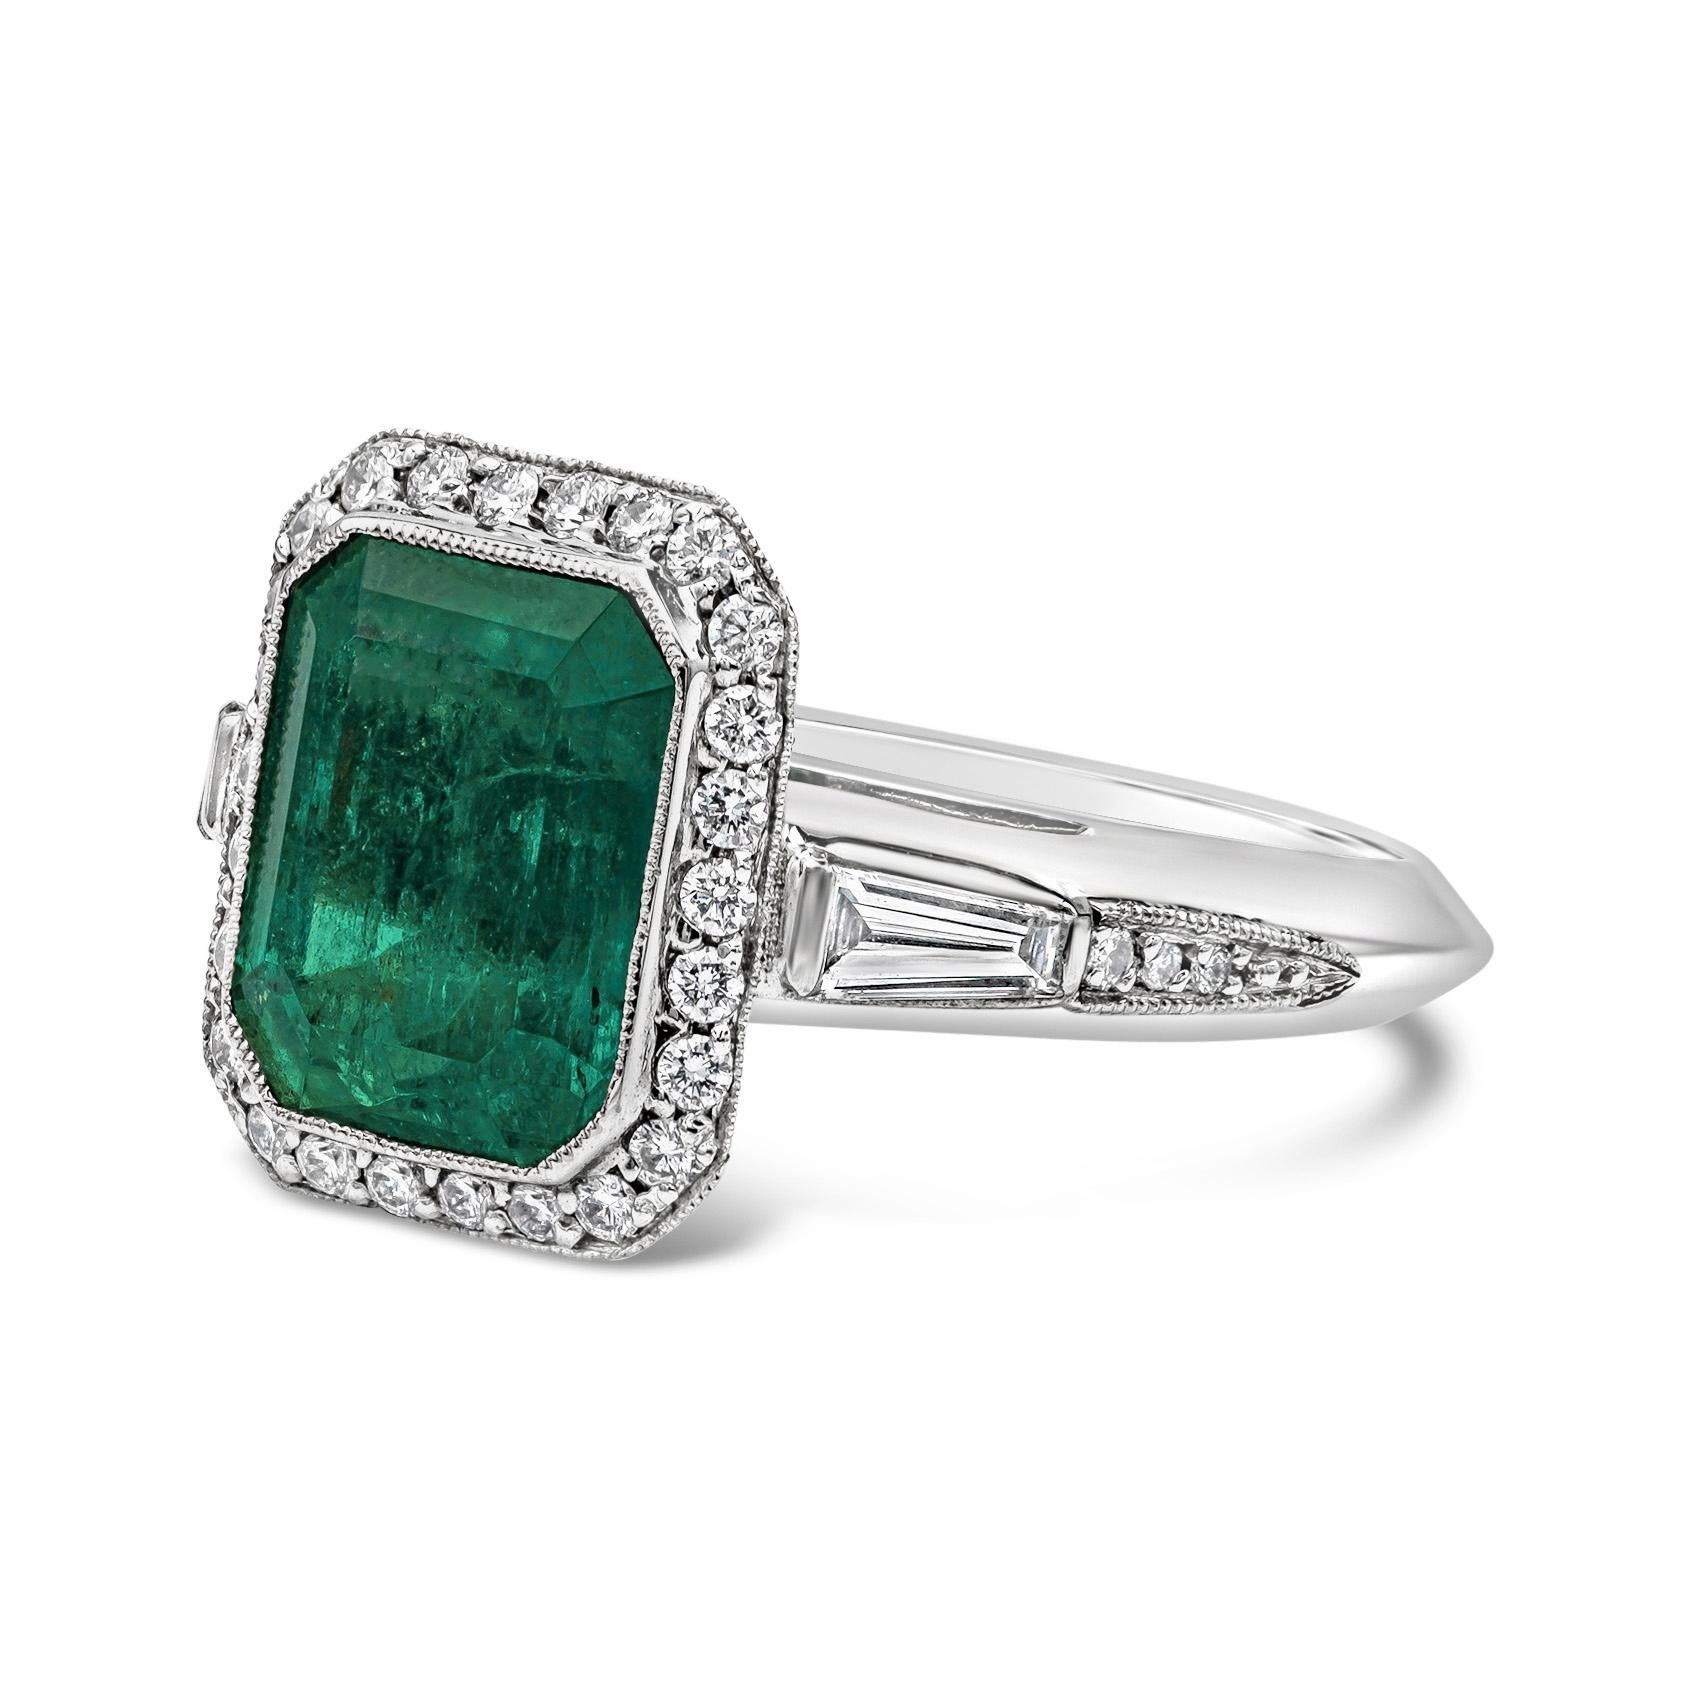 A stunning gemstone engagement ring style showcasing an emerald cut green emerald center stone weighing 4.58 carat total. Surrounded by brilliant round diamonds in a halo design and accented with more diamonds set on each side of the shank. Diamonds